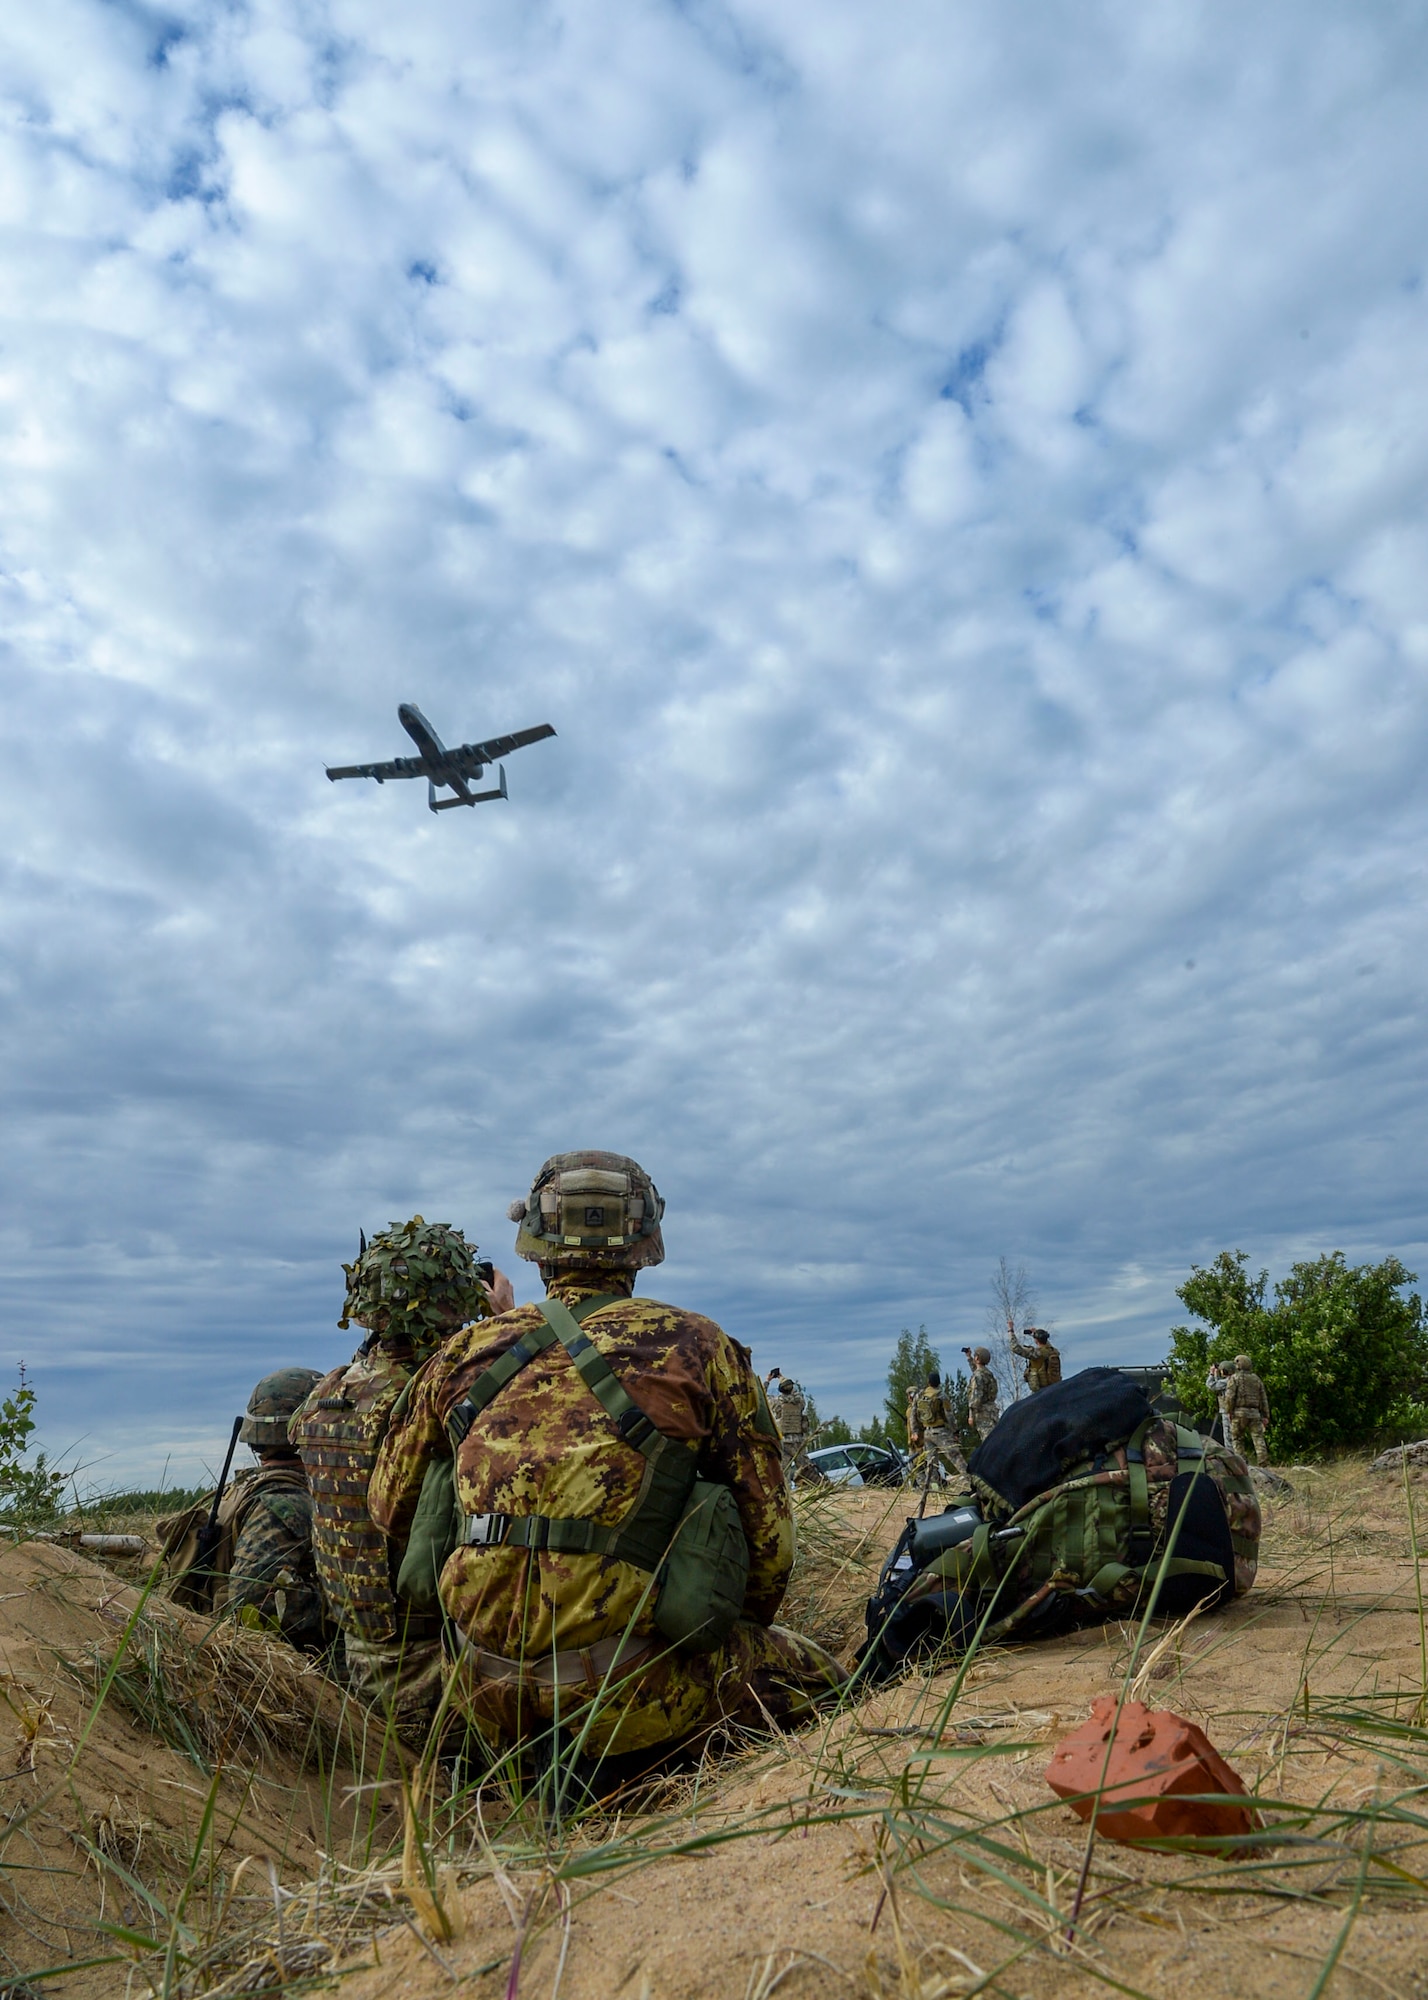 Italian Joint Terminal Attack Controllers watch an A-10 Thunderbolt II fly over Adazi, Latvia, June 7, 2018. Partner nations’ controllers worked with U.S. pilots to call in air support on mock targets during Saber Strike 18. (U.S. Air Force photo by Staff Sgt. Jimmie D. Pike)